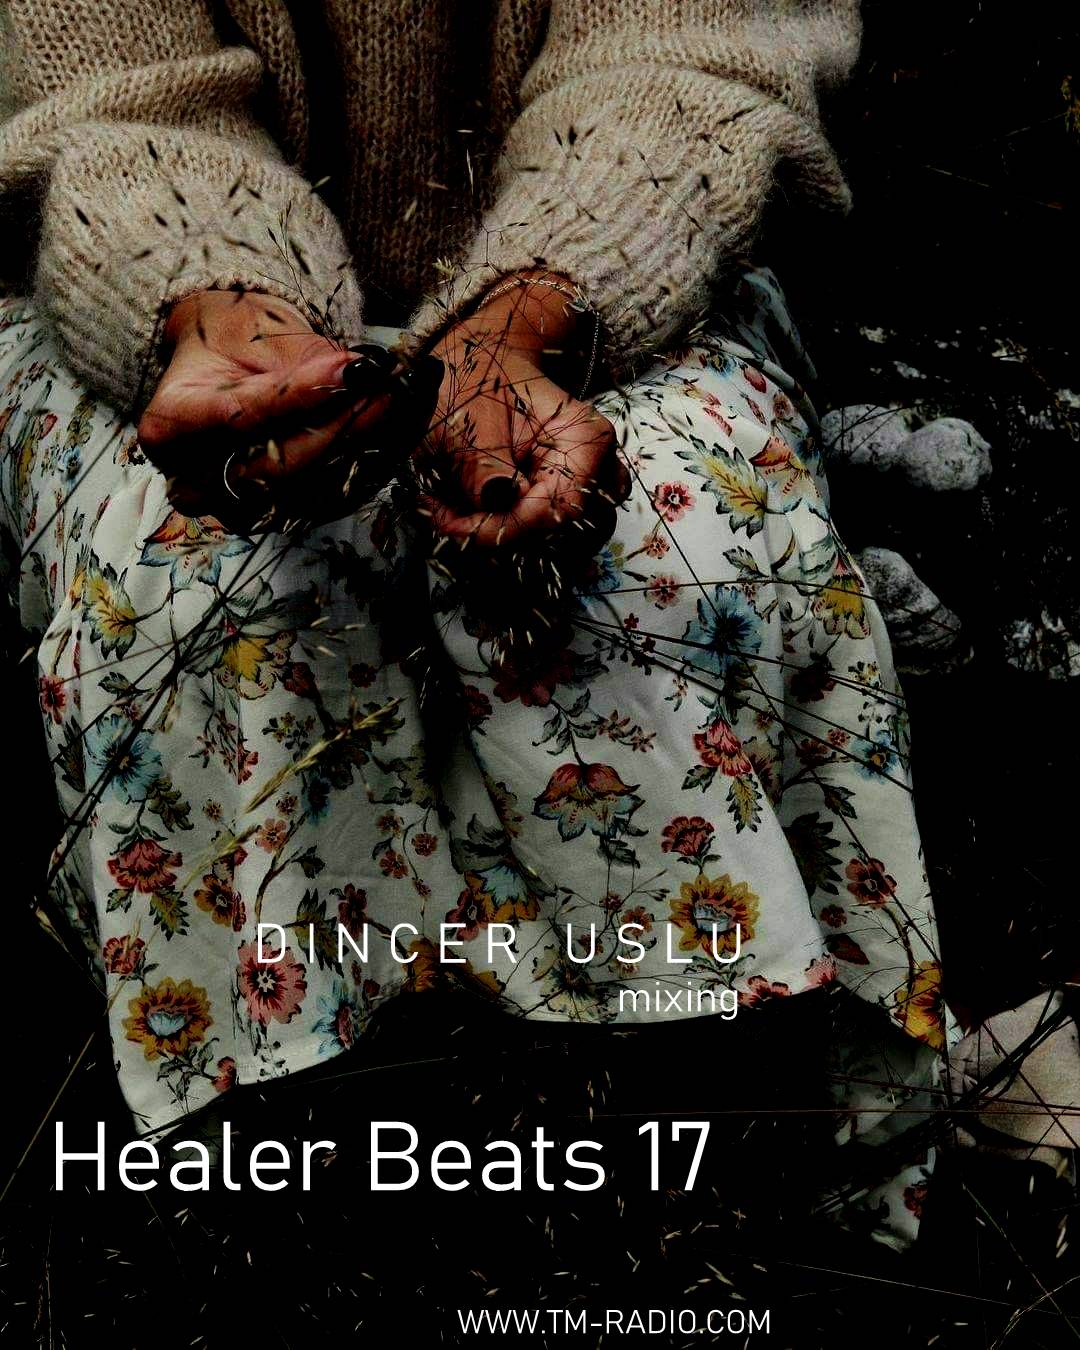 HEALER BEATS :: Episode aired on August 14, 2021, 8pm banner logo